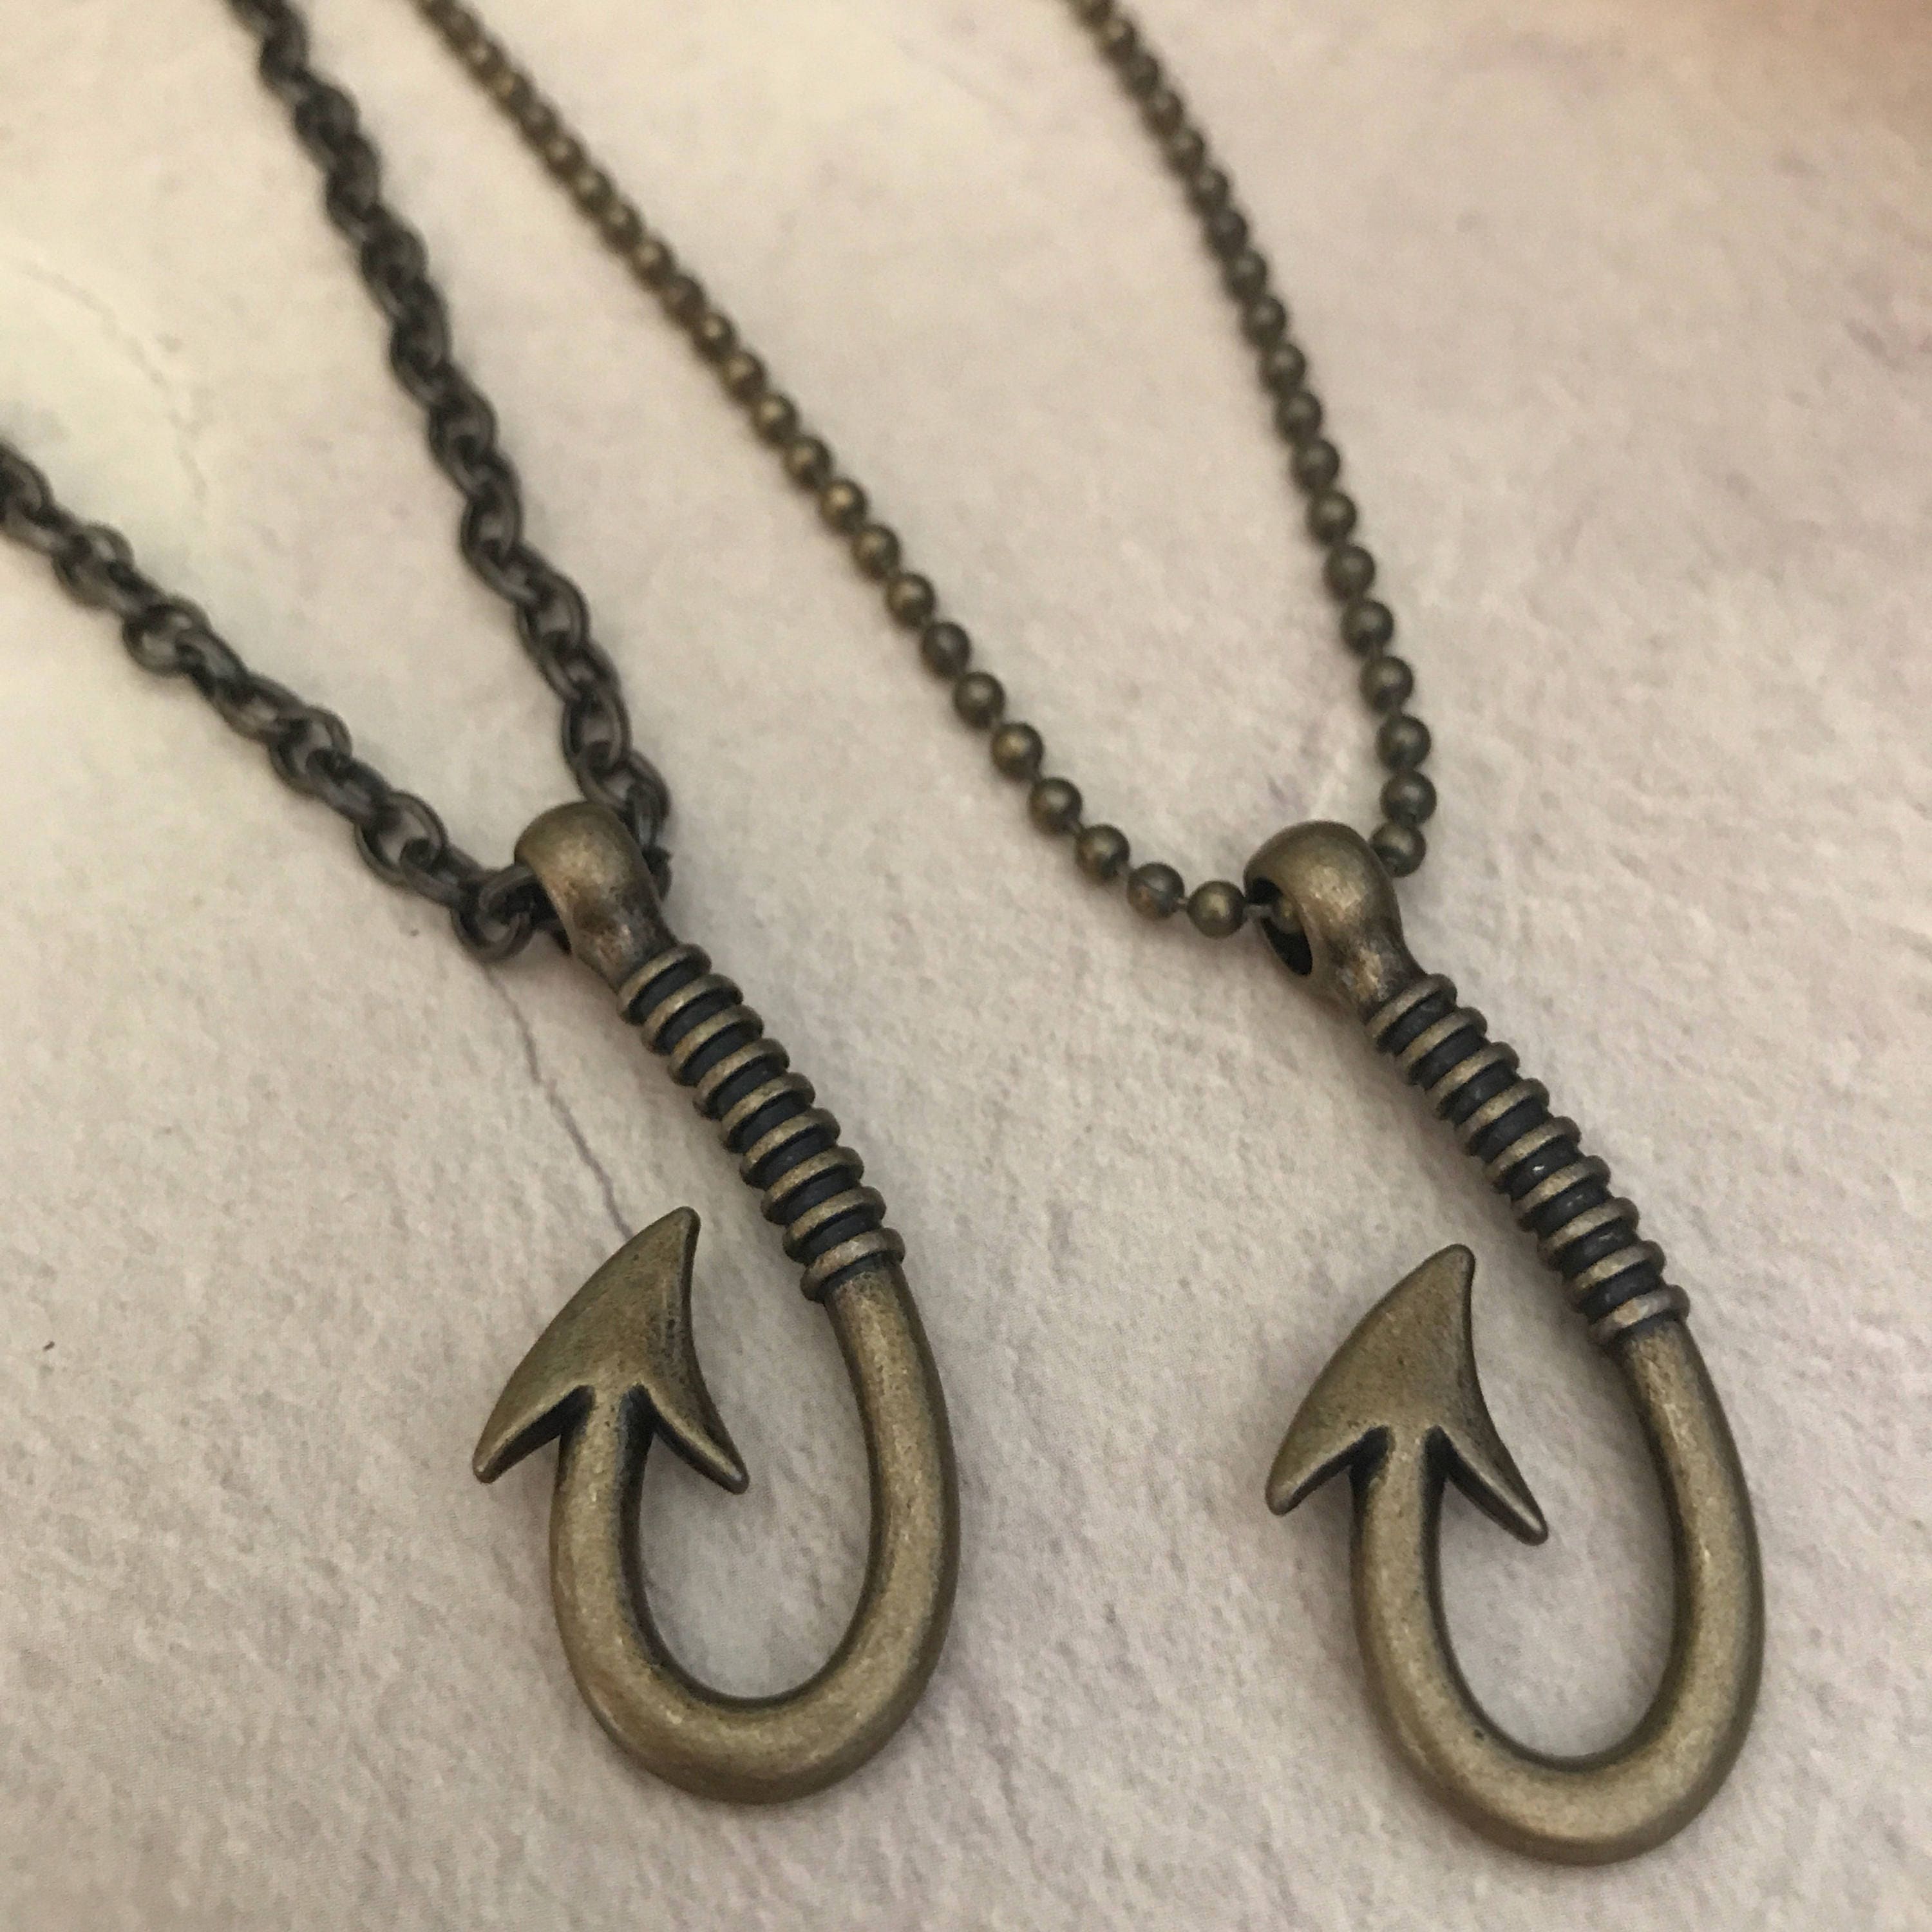 Hook necklace for men, men's necklace with silver hook pendant, stainless  steel chain, fisherman, fish hook, men's necklace, nautical, groomsmen gift  – Shani & Adi Jewelry